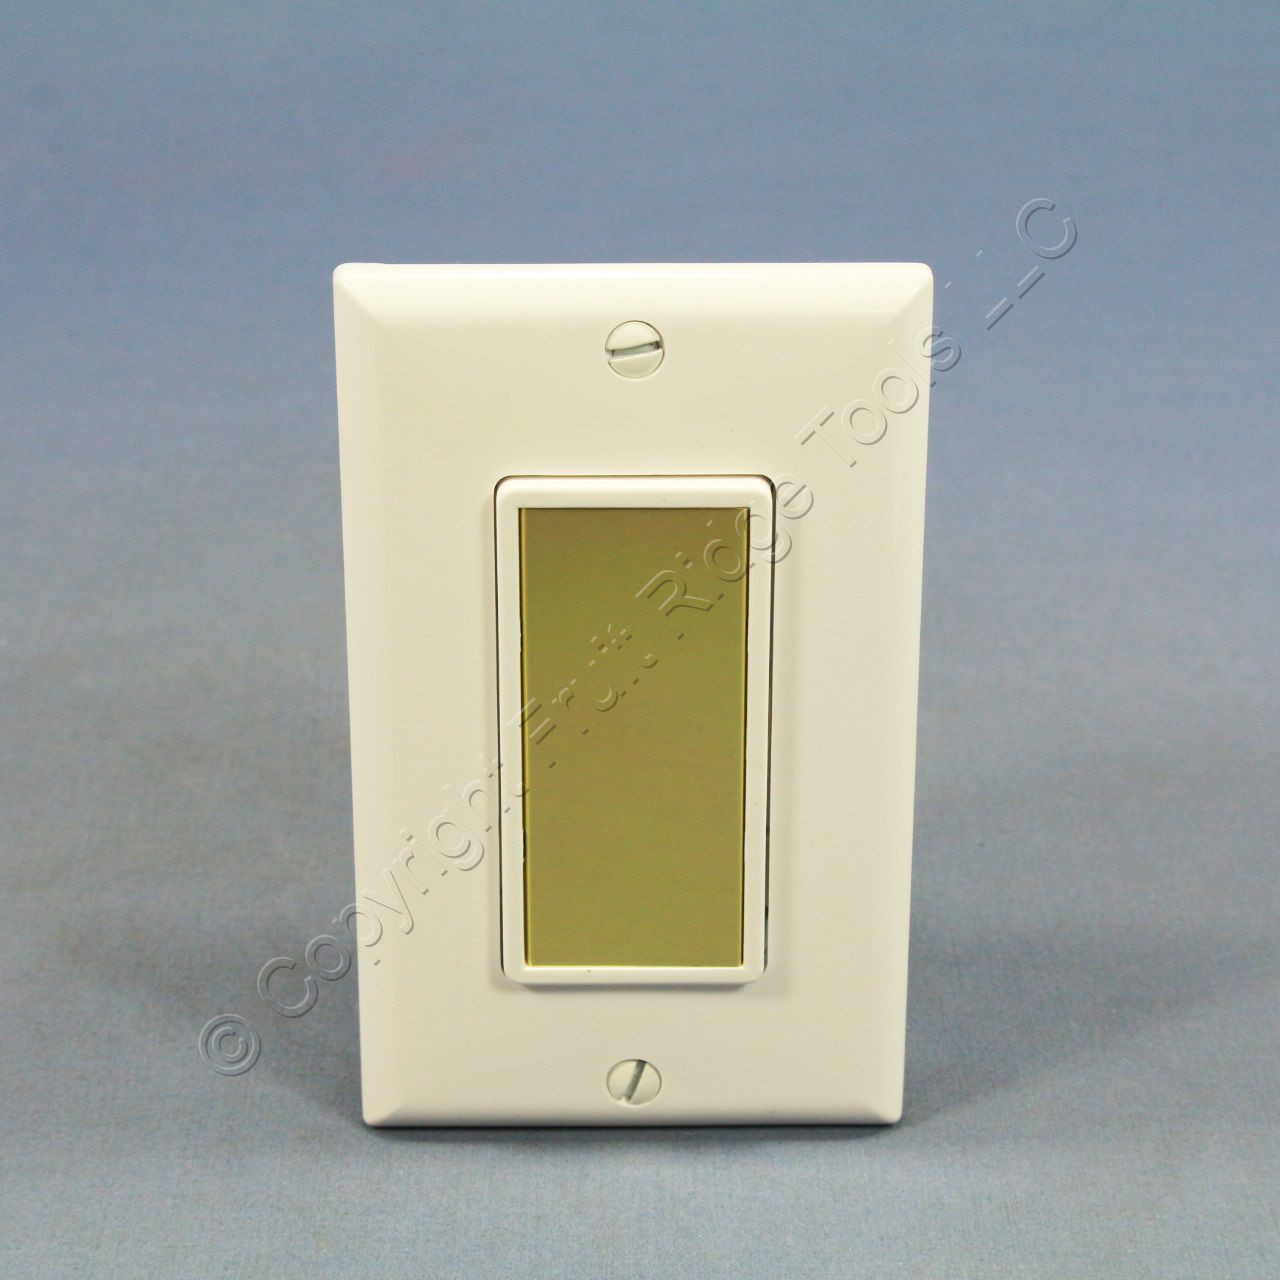 1pcs-COOPER 6461W Remote Touch Dimmer/Switch 600W 120V AC/CA 60Hz 